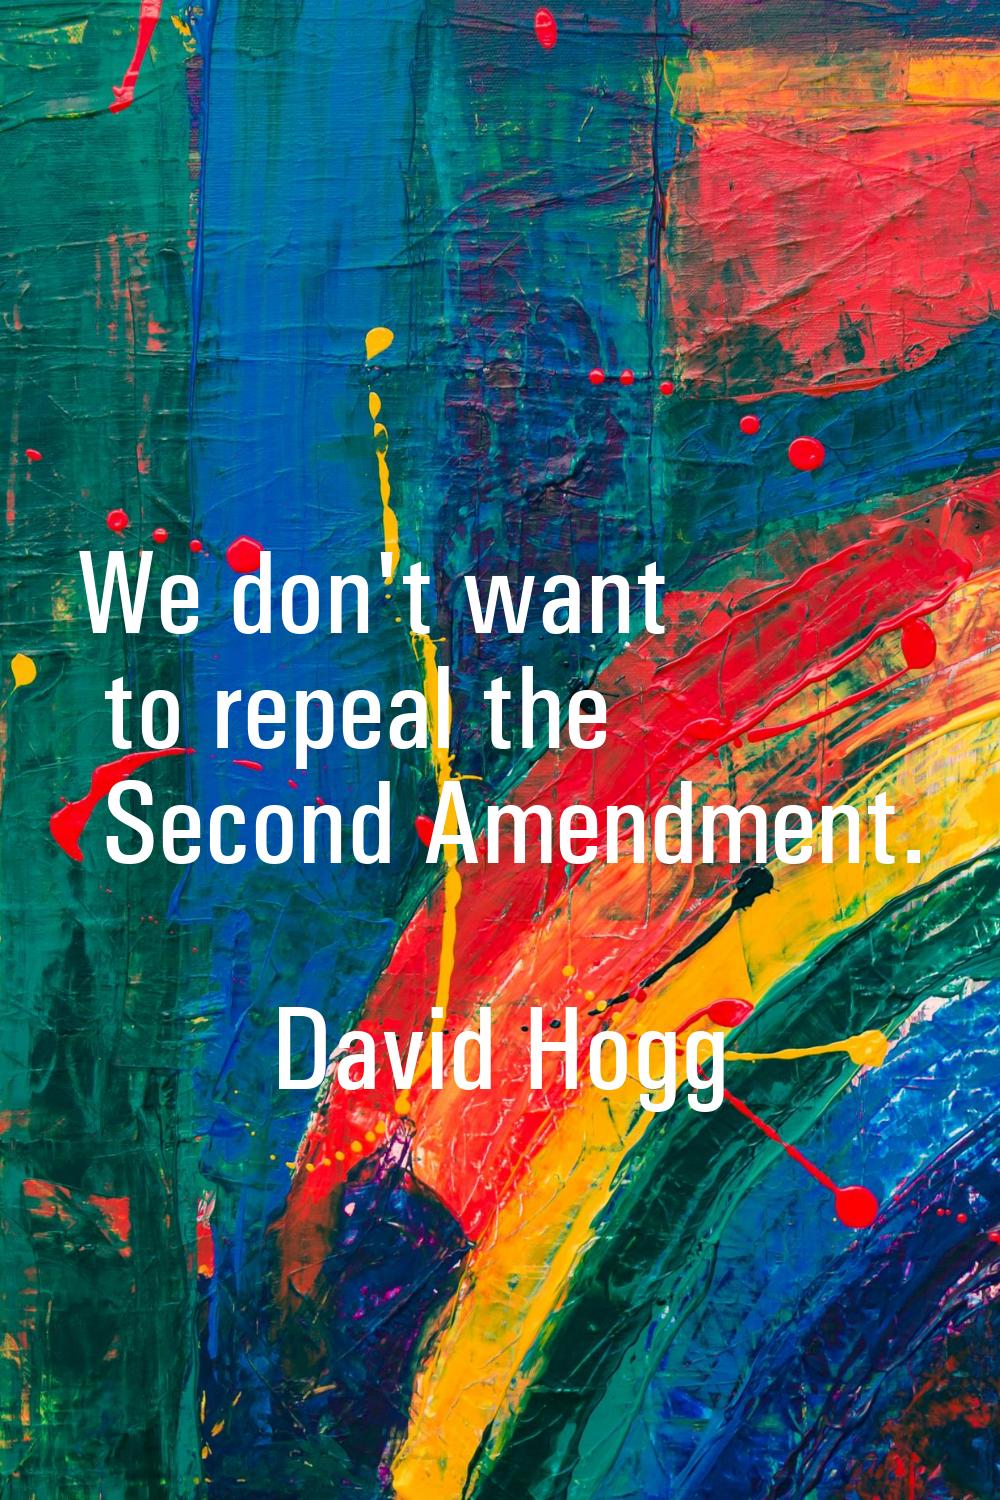 We don't want to repeal the Second Amendment.